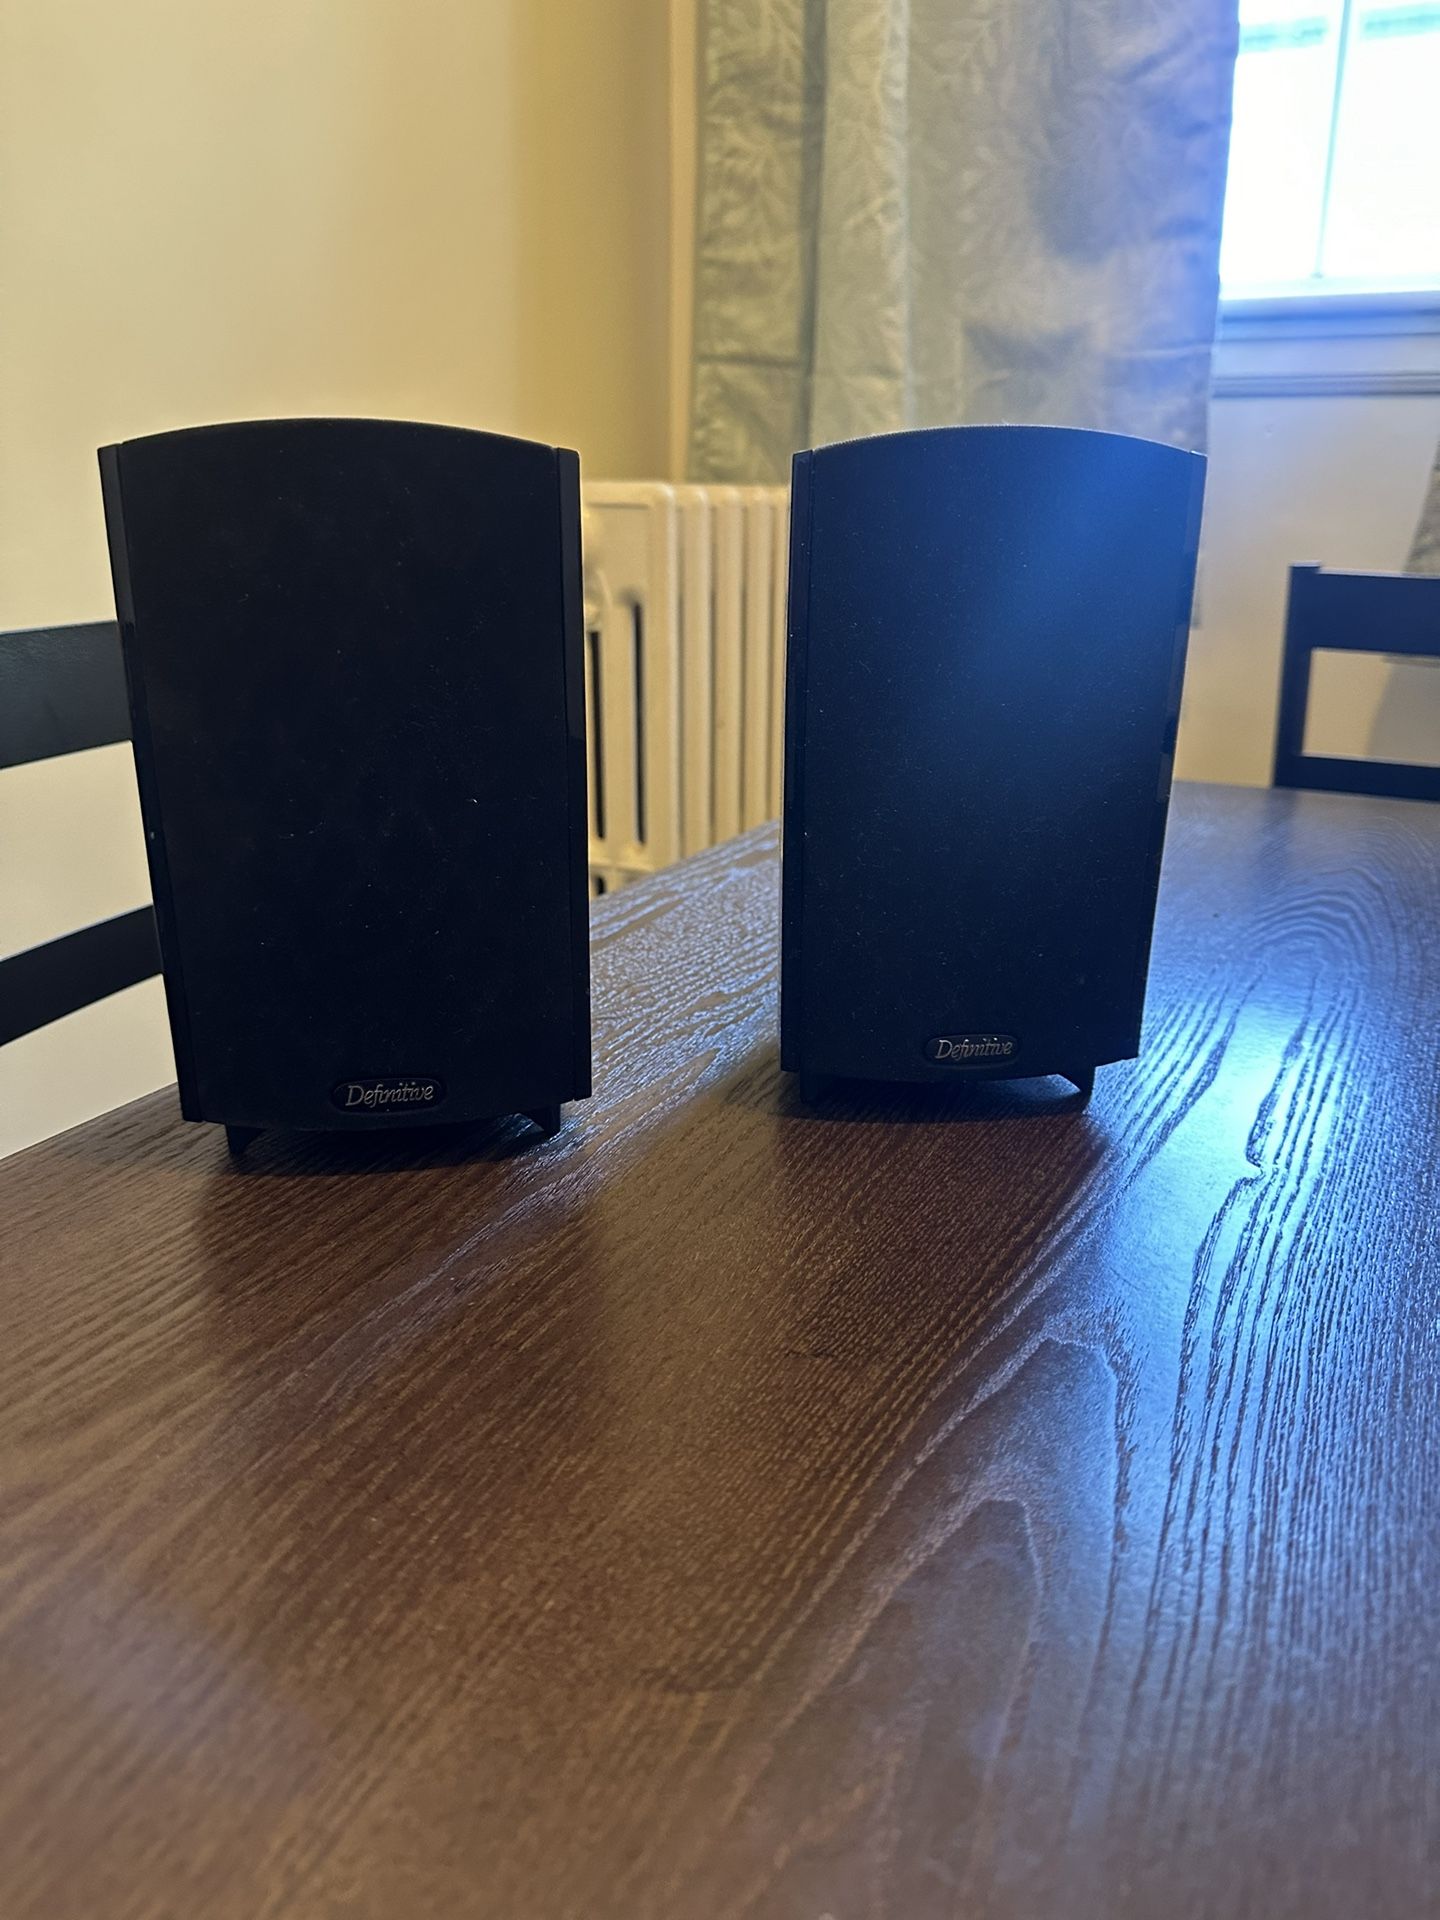 2 Definitive Home Theater Speakers